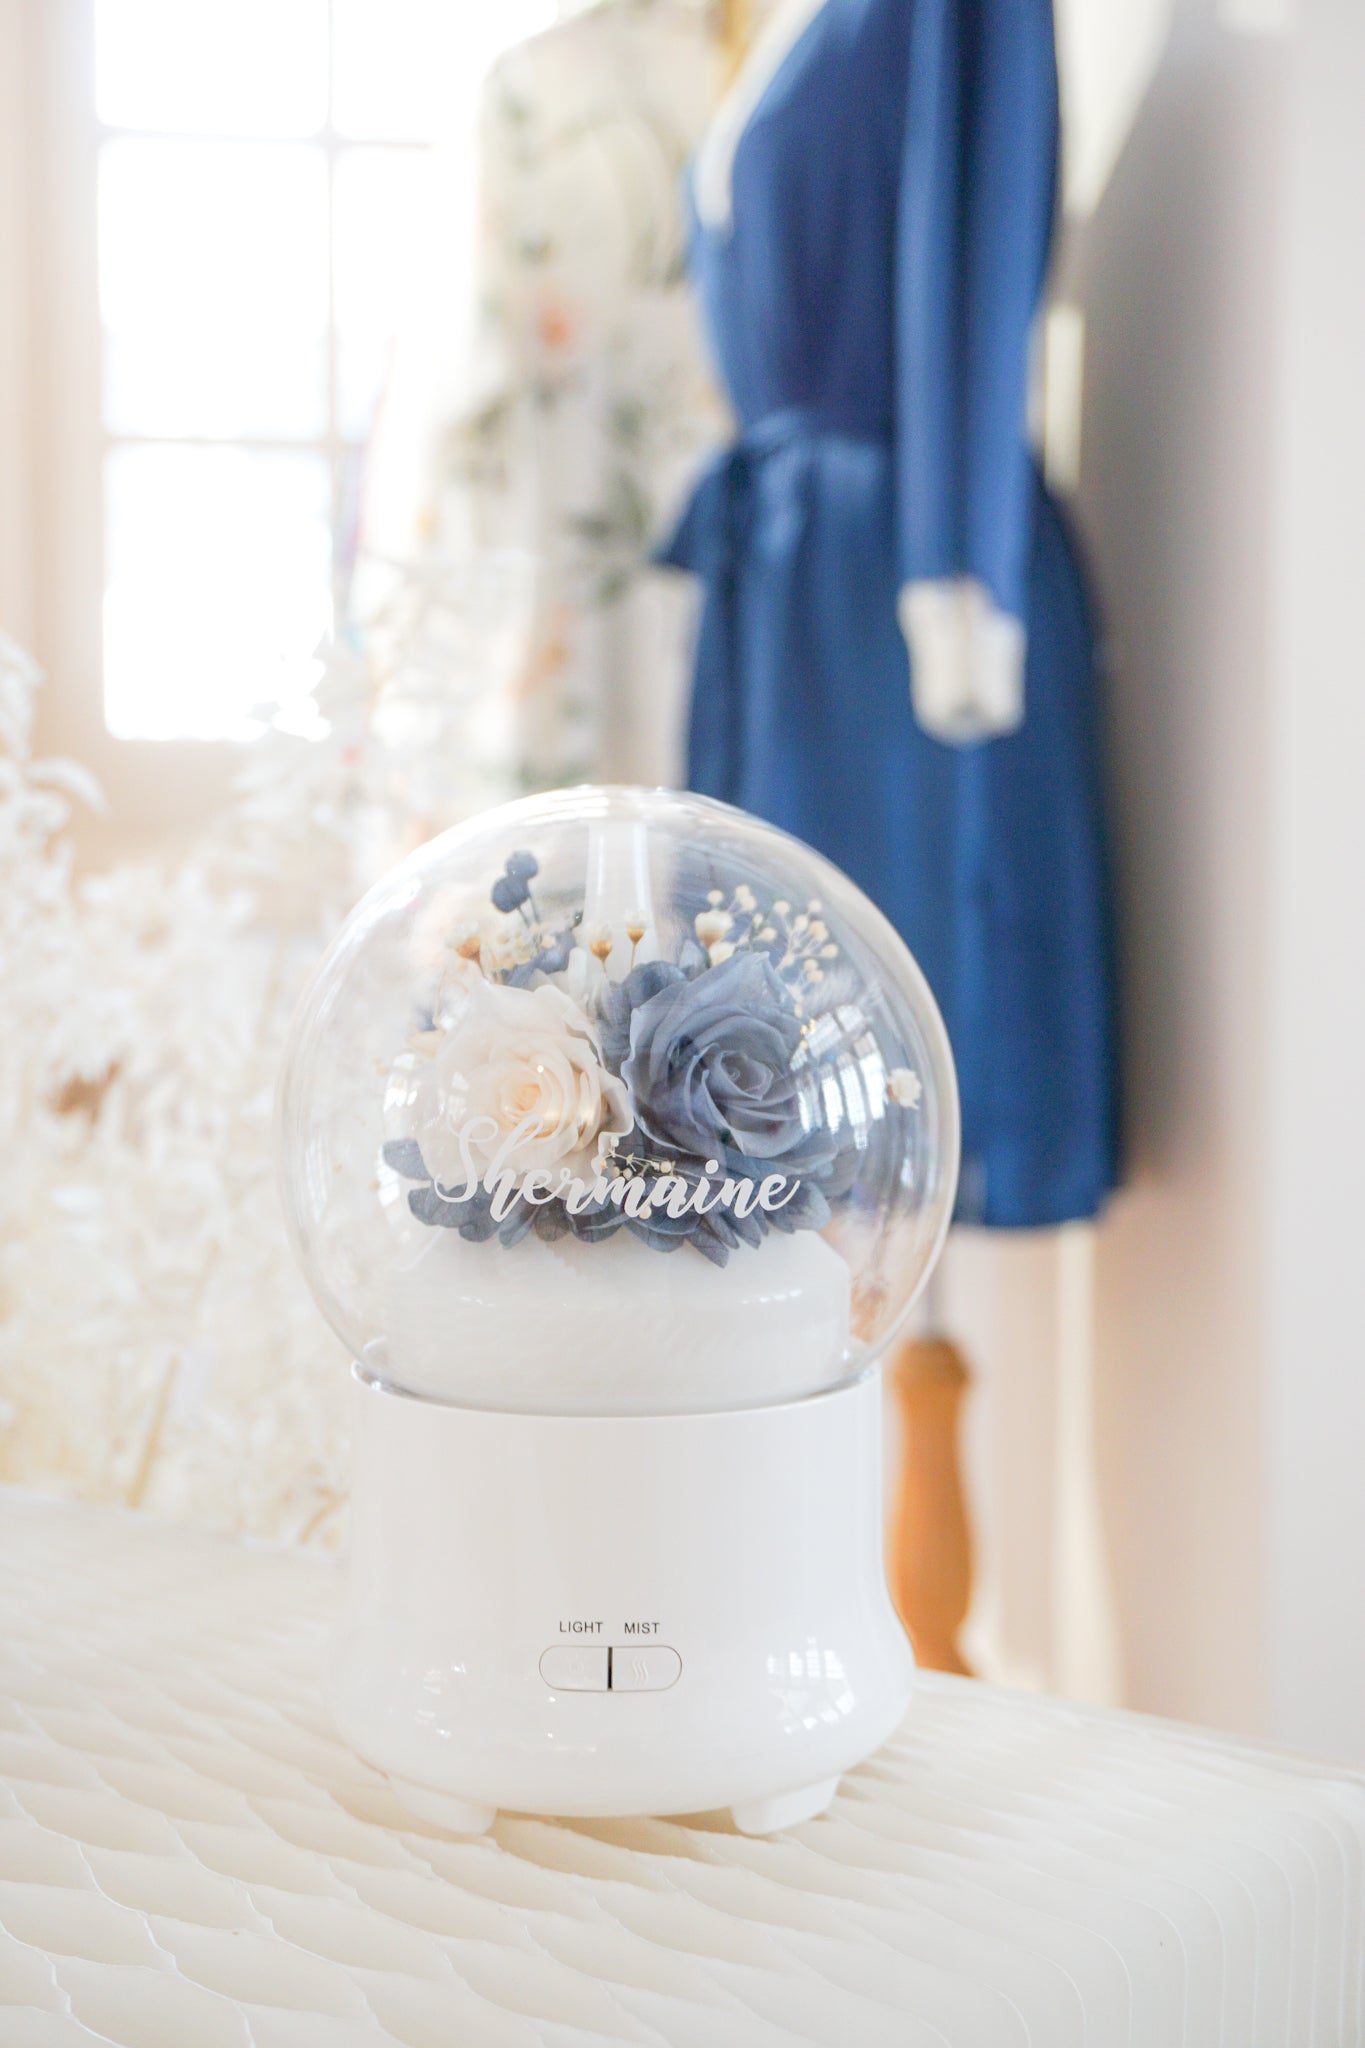 Customised Aroma Diffuser/Humidifier with Blue-Cream Preserved Flowers, Light and Mist